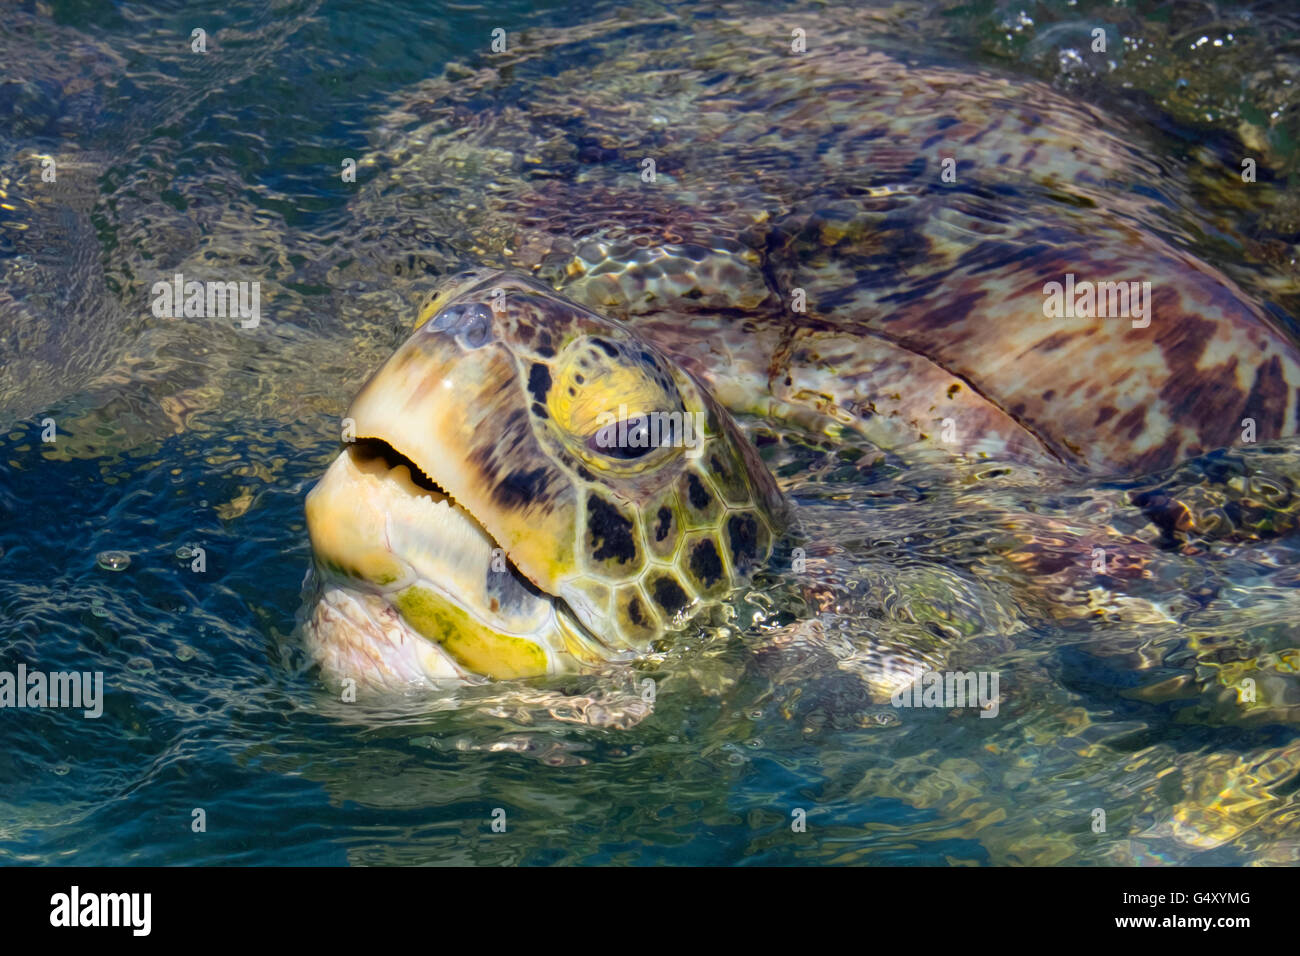 Large green turtle breaking water with a subtle oil painting effect Stock Photo